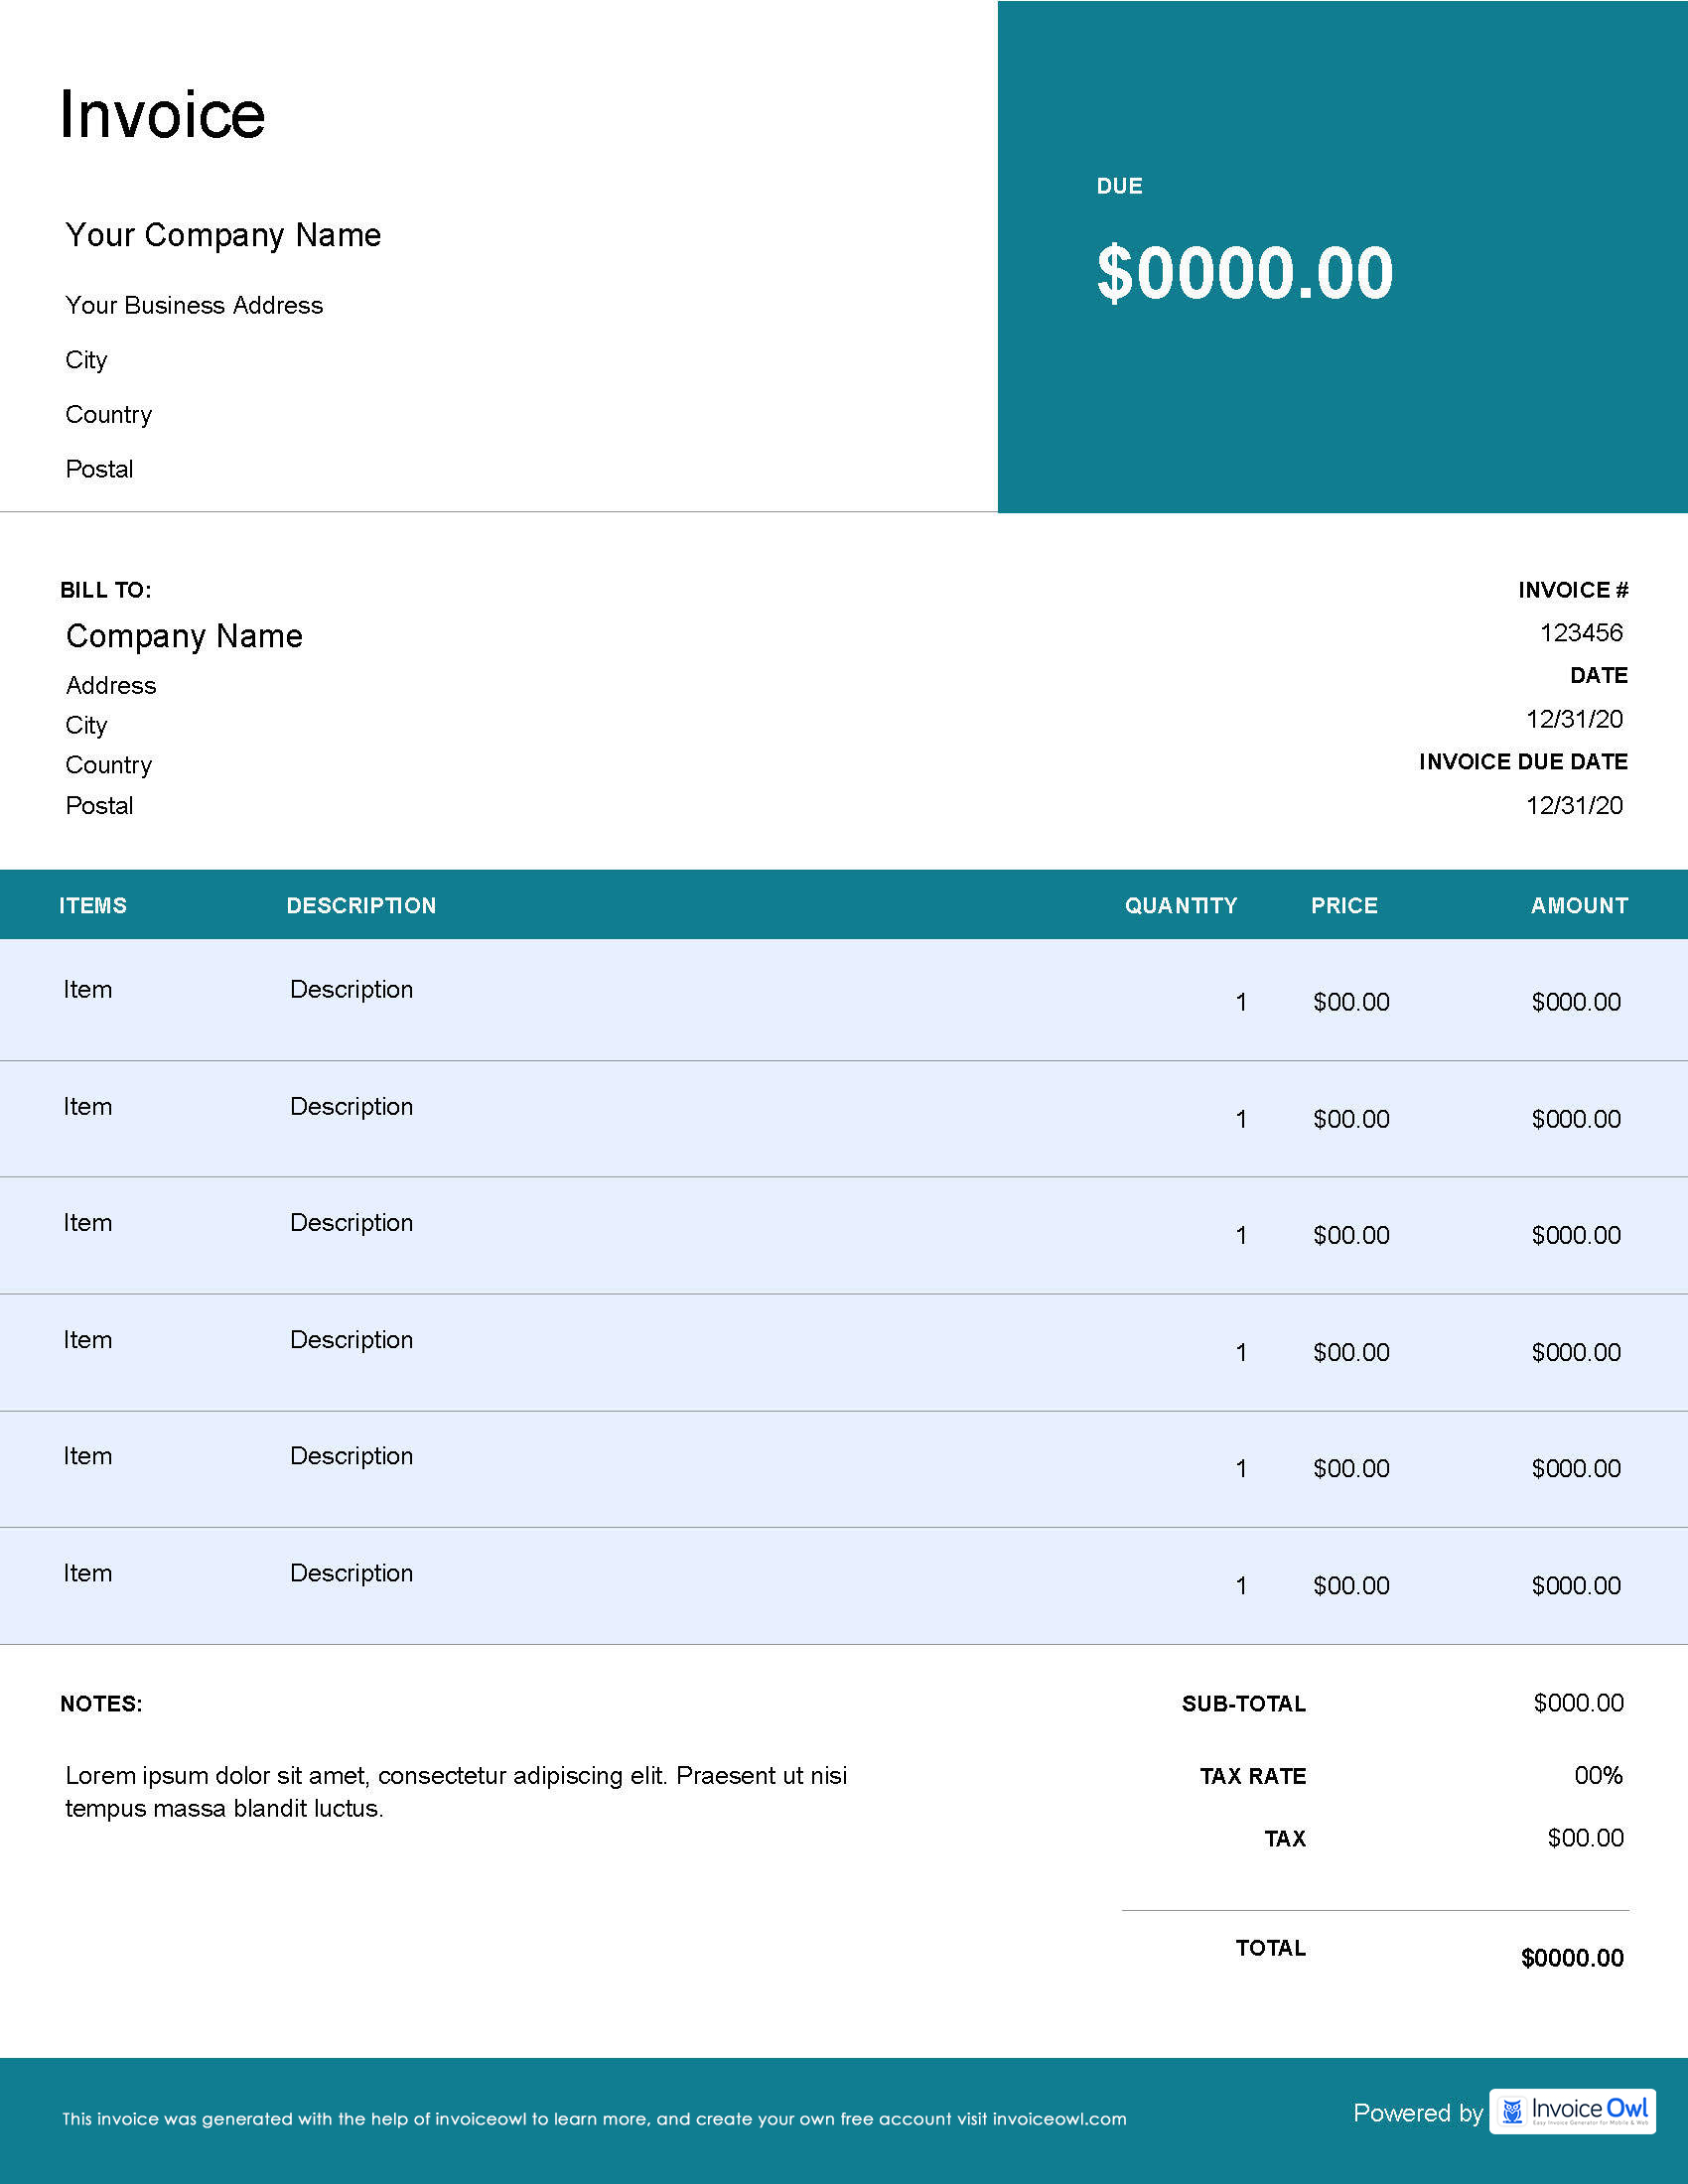 Download corporate law invoice template